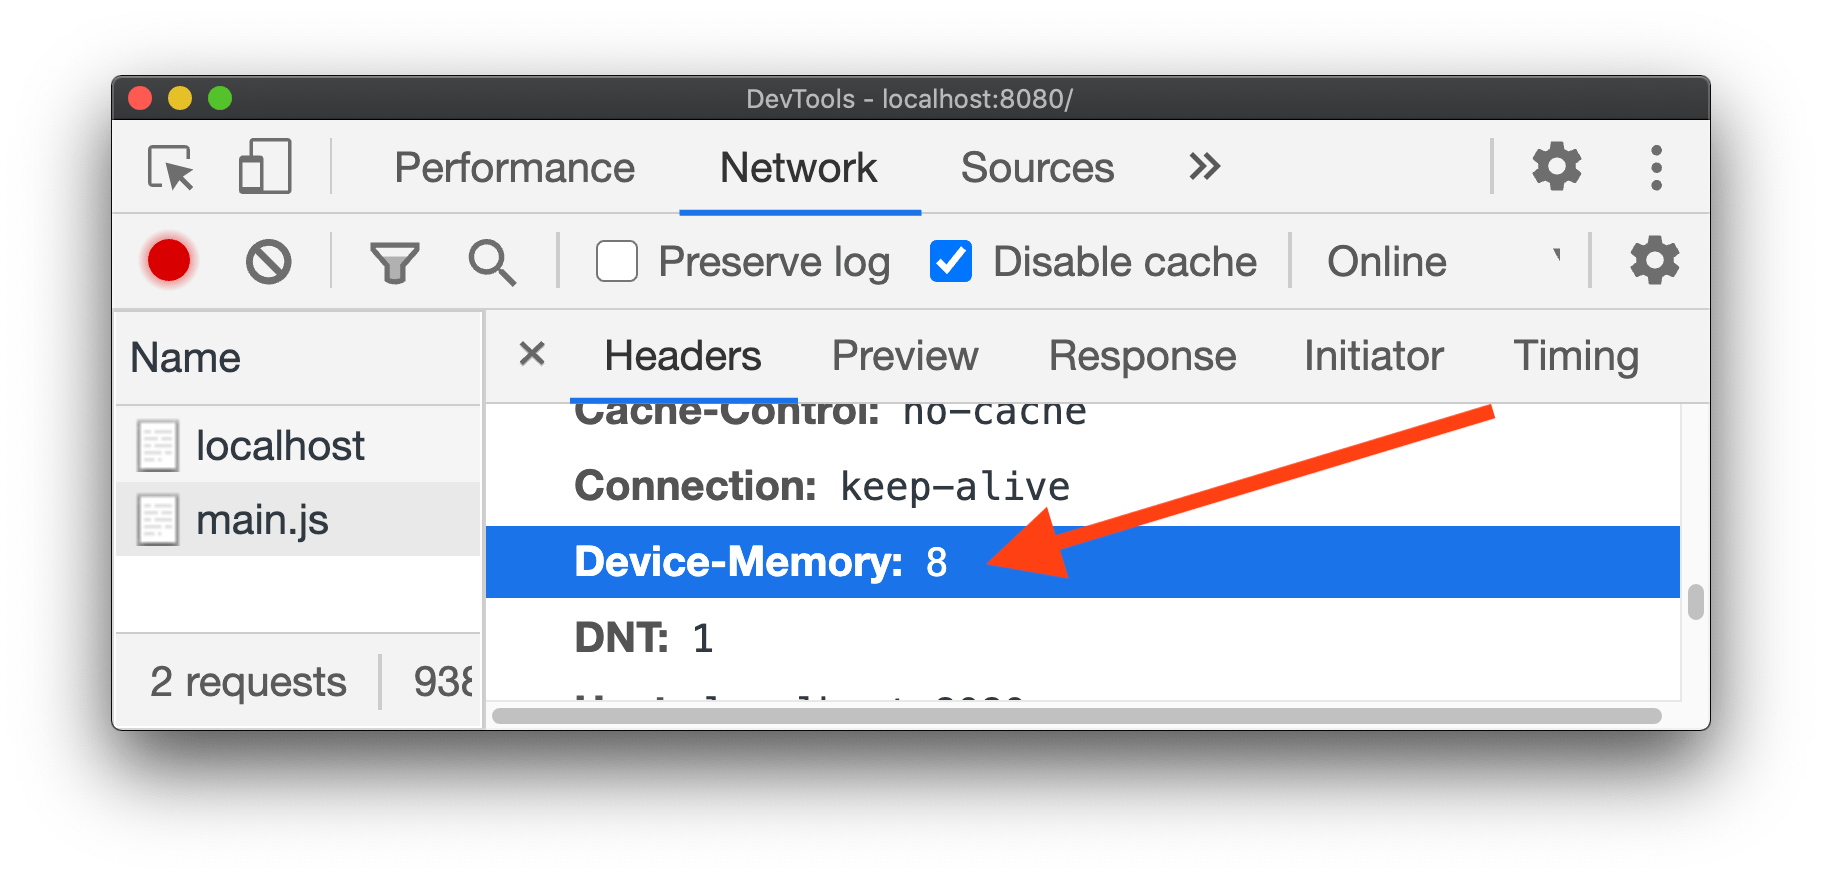 Getting the device memory from a network request header